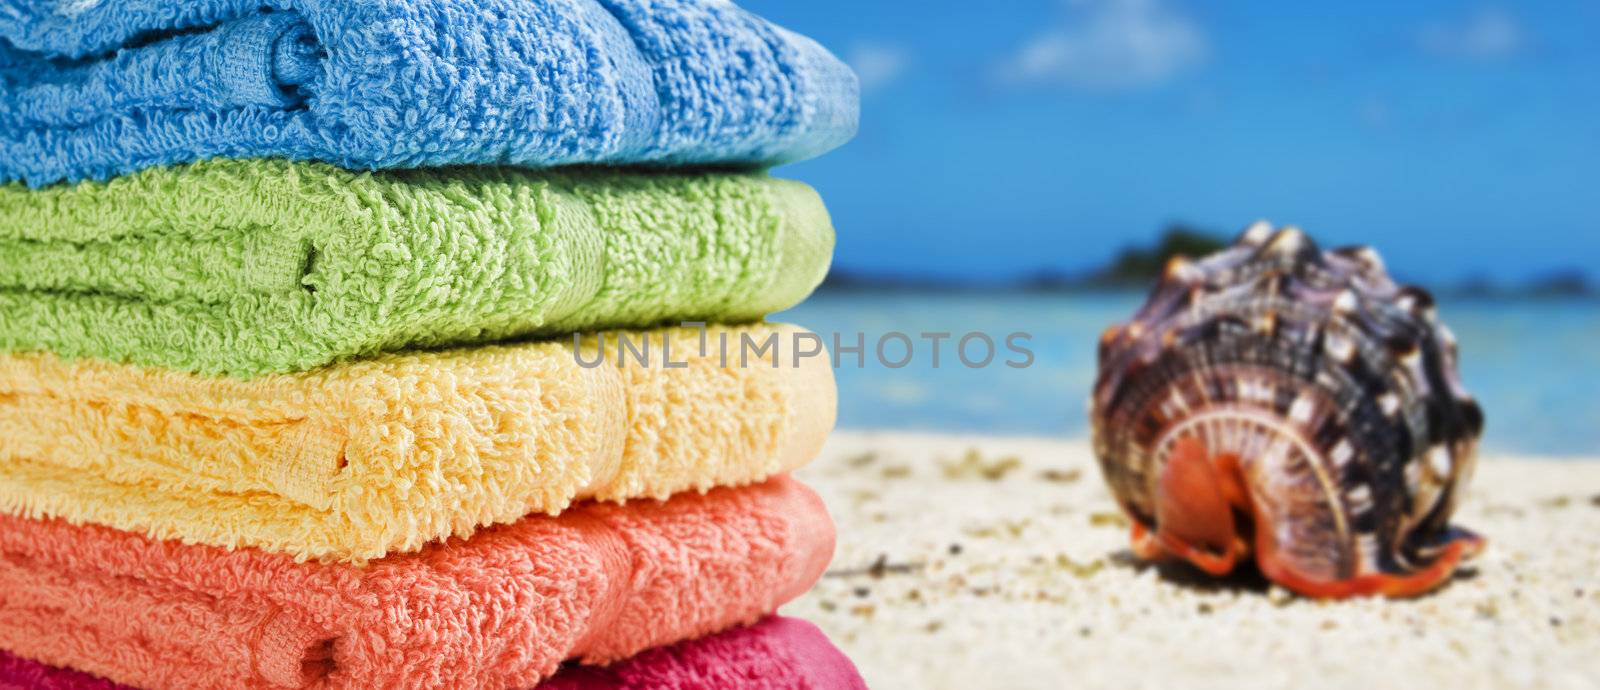 Colorful towels on a white beach with a sea shell by tish1